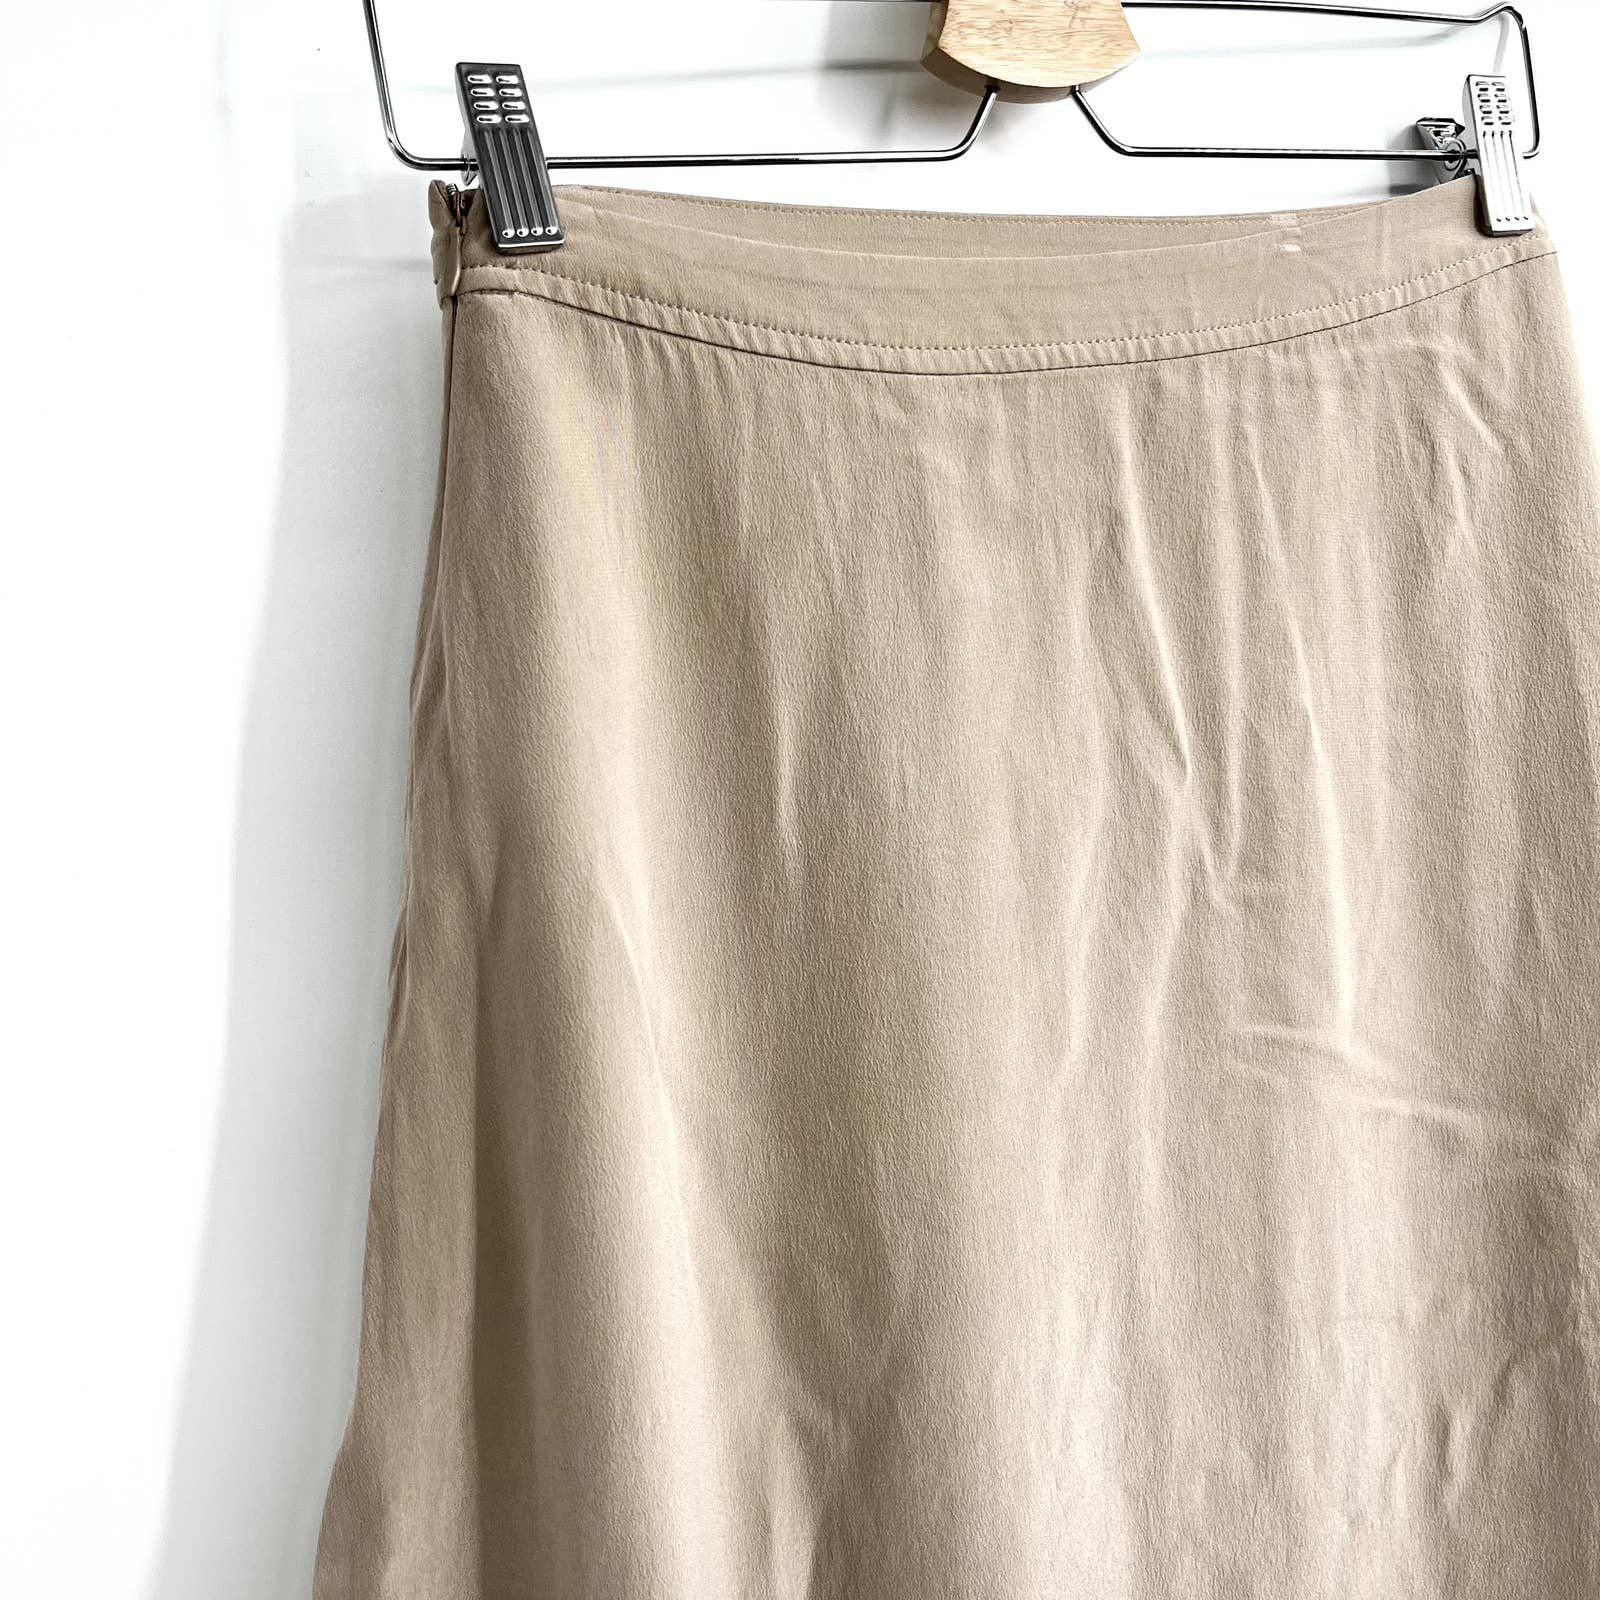 cheapest place to buy  Armani Exchange Mulberry Silk Skirt Tan Taupe Brown Lightweight Skirt High Low mWs0cWS0X best sale